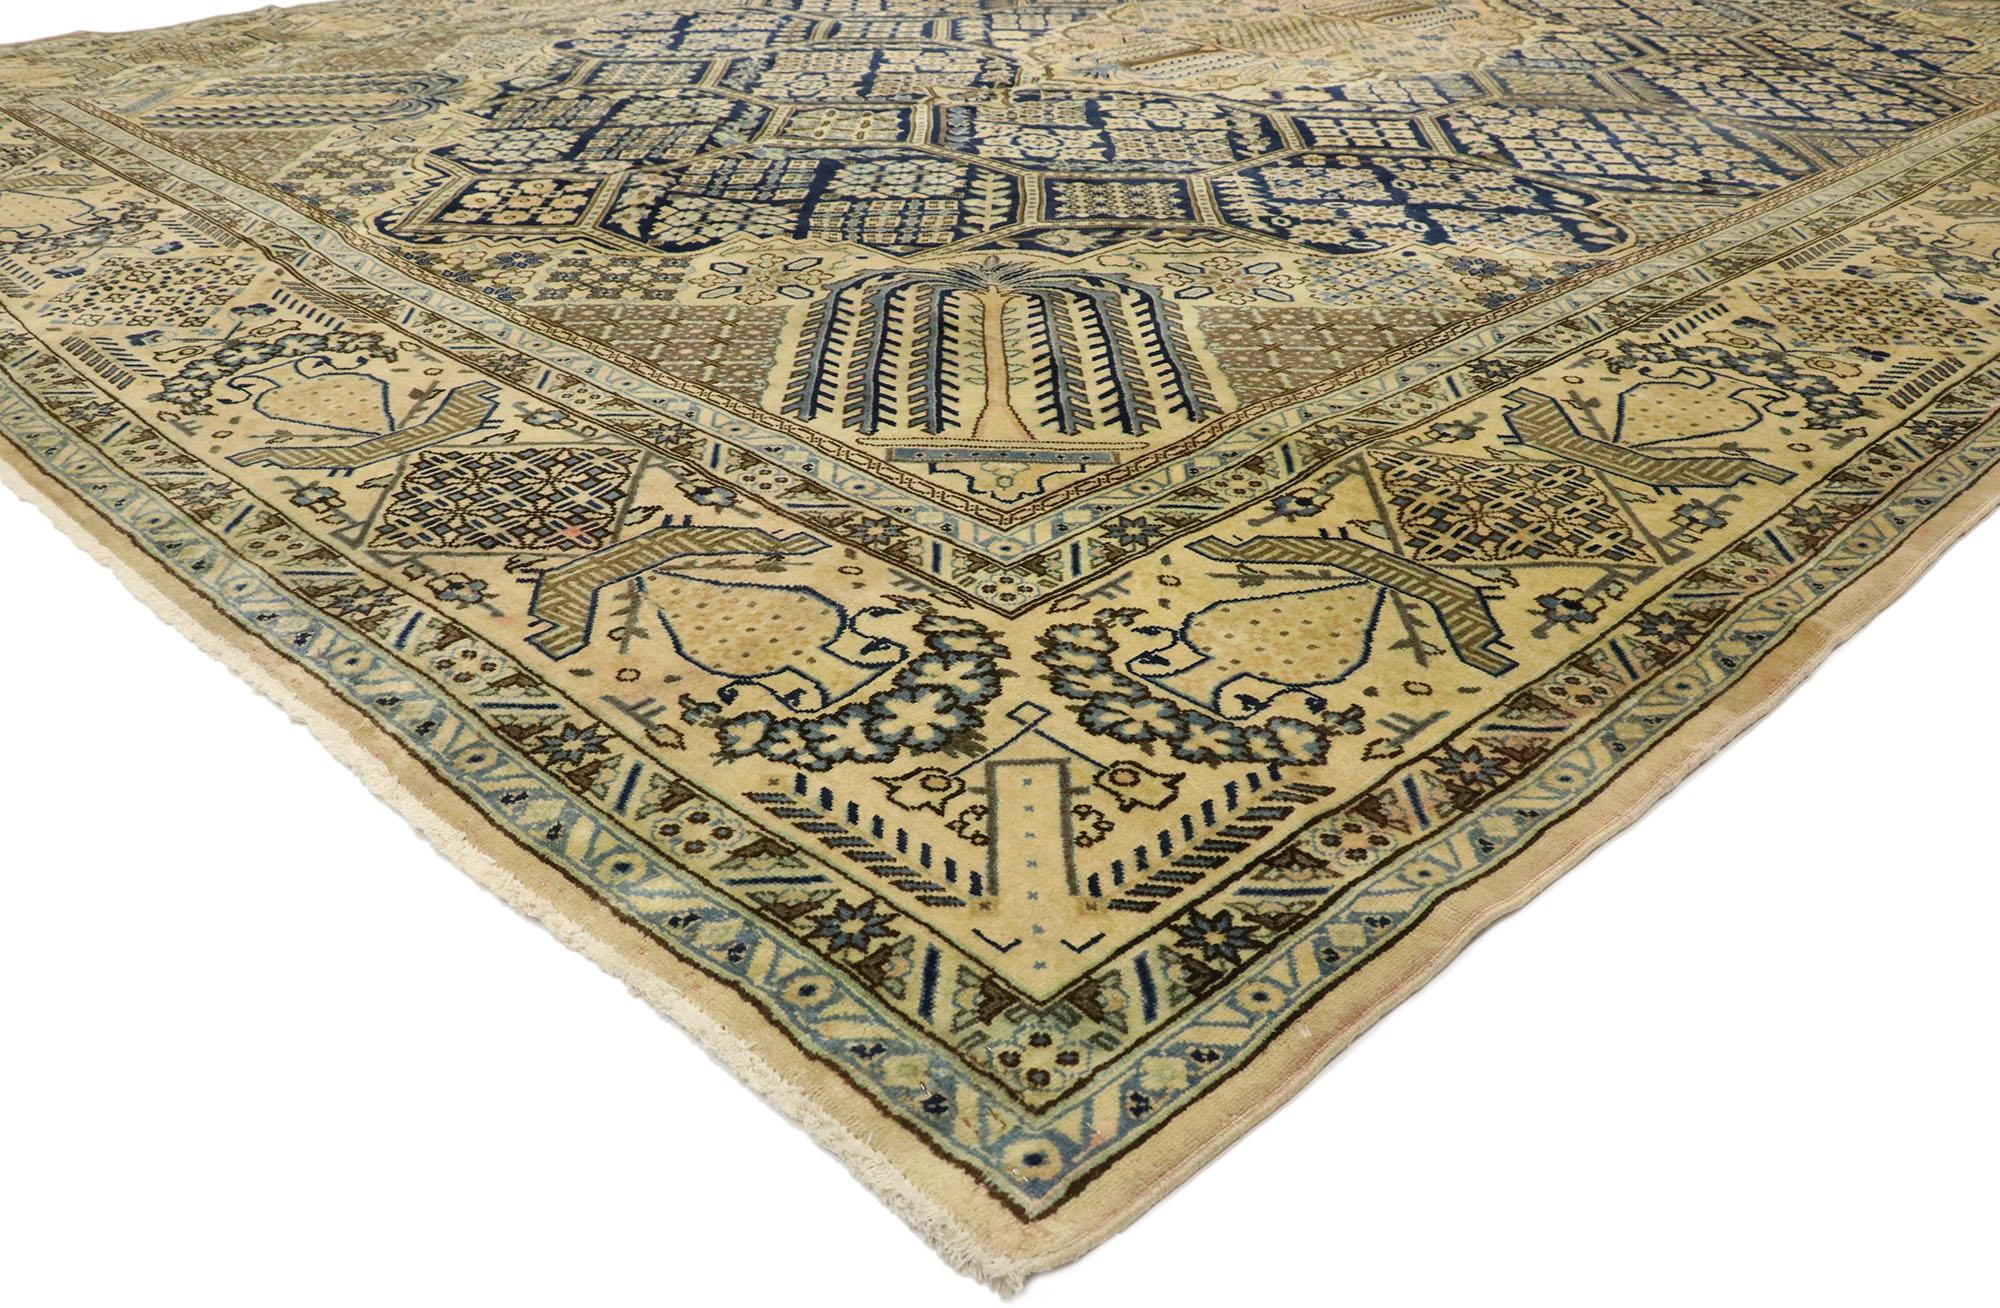 76502 vintage Persian Najafabad rug with Joshegan Design and French Country style. Densely ornamented with the depth and beauty of traditional Persian designs, this hand knotted wool vintage Persian Najafabad rug displays an elegant French Country